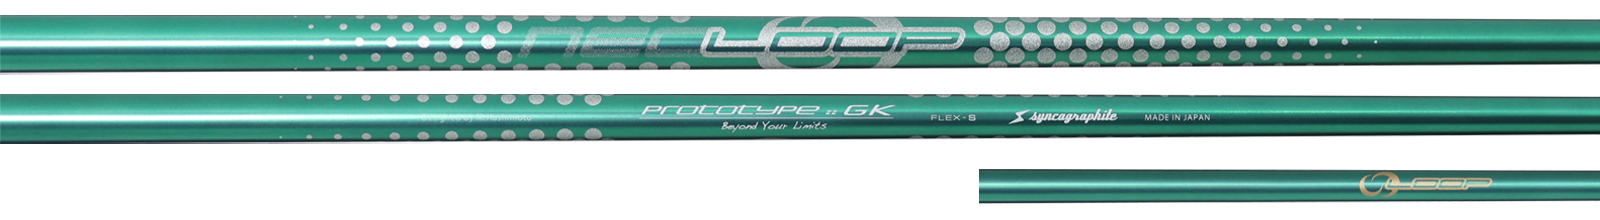 LOOP SHAFT :: for Driver | syncagraphite inc. :: 株式会社シンカ ...